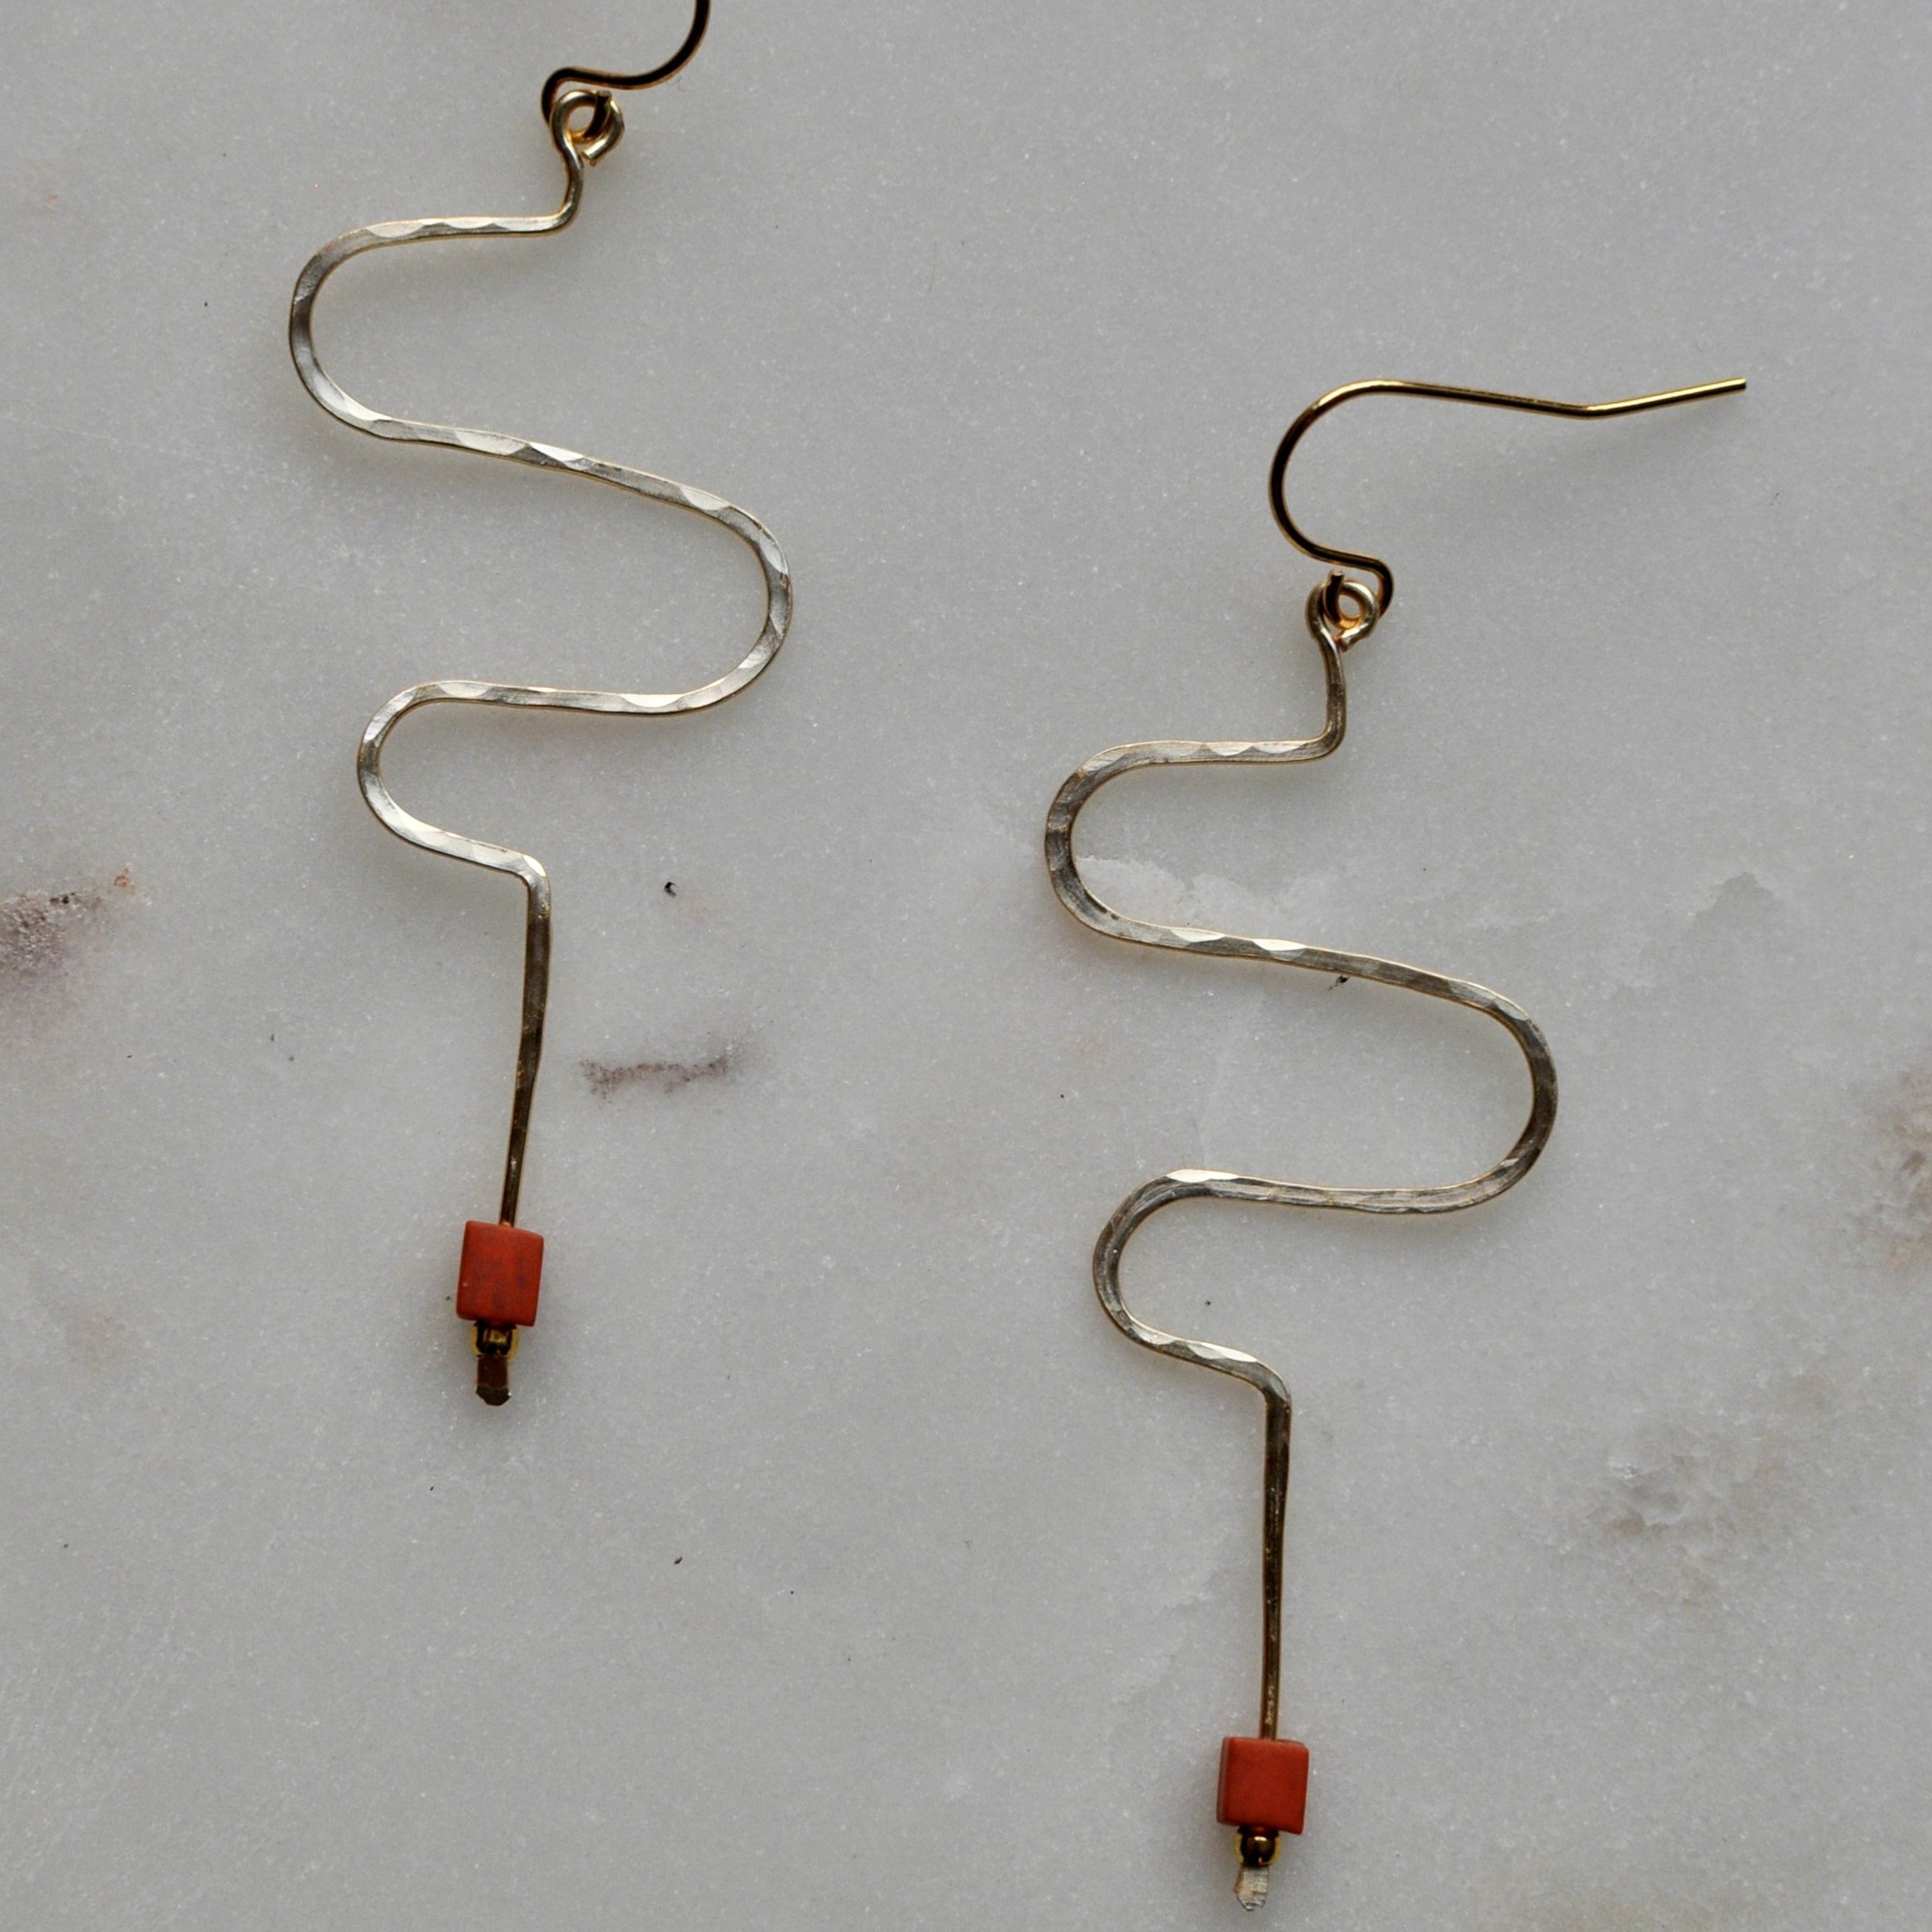 Squiggle Post Earrings, Small Gold Squiggle Stud Earrings